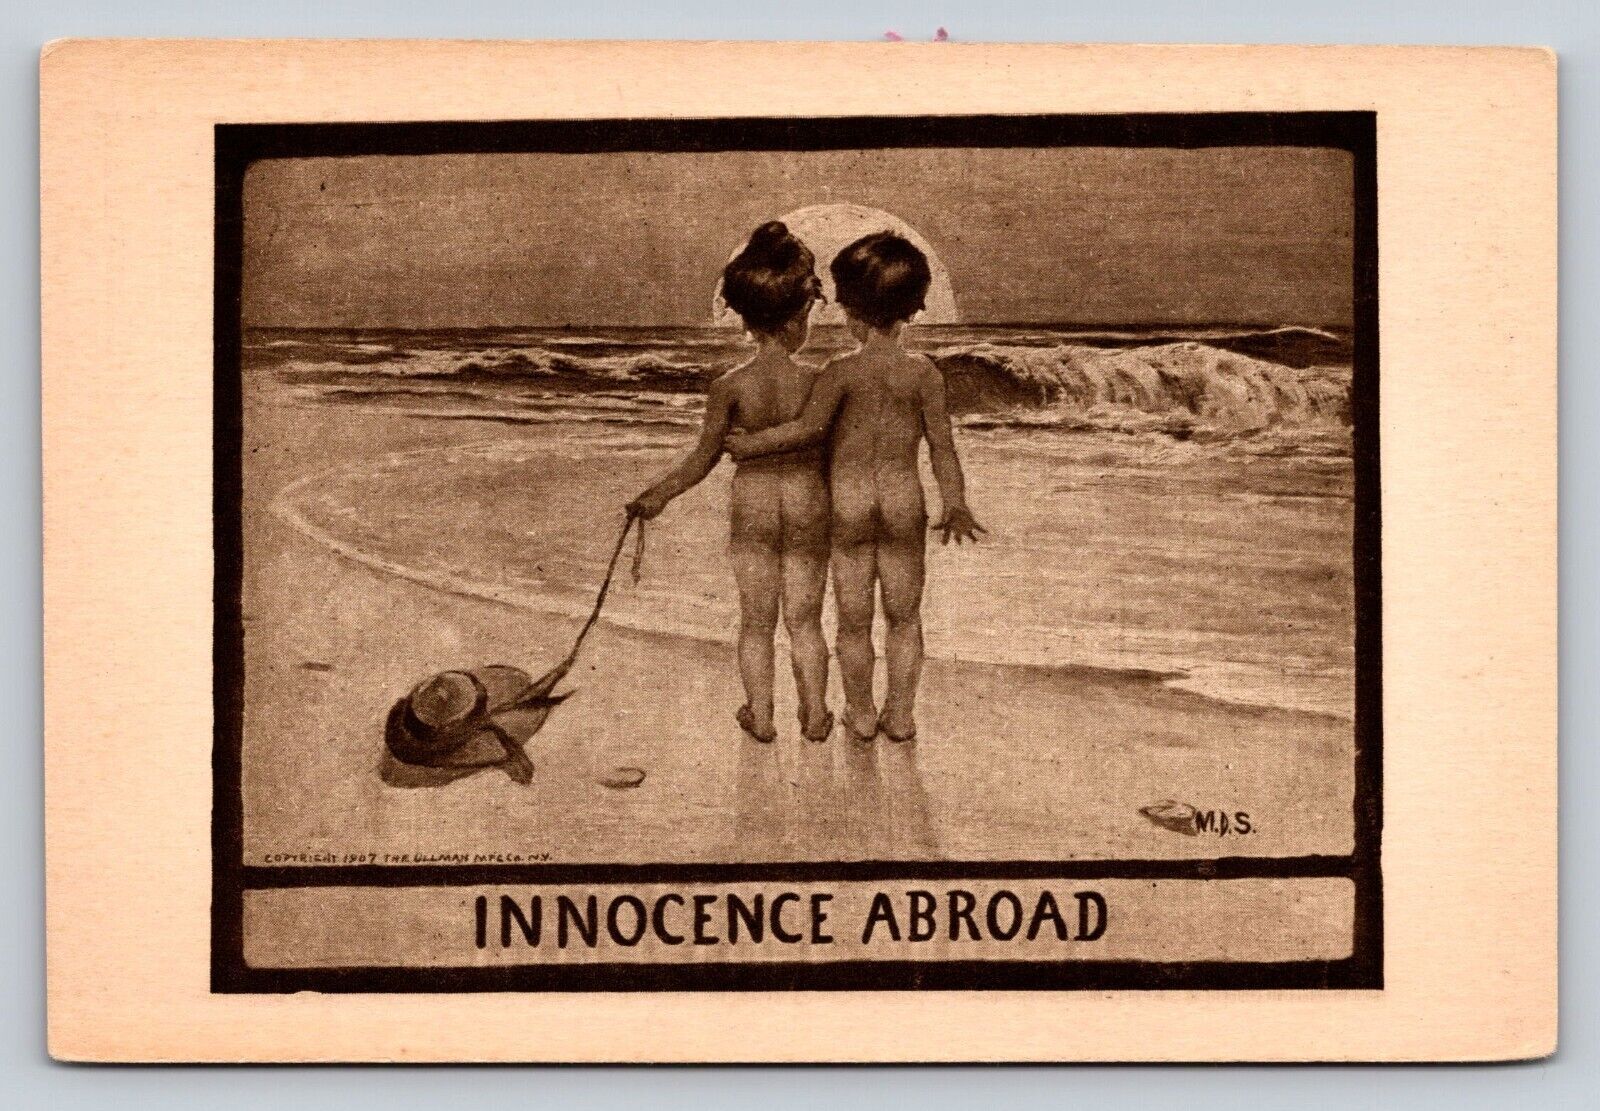 Artist Signed Young Love Childhood Sweethearts Children Beach Innocence Abroad